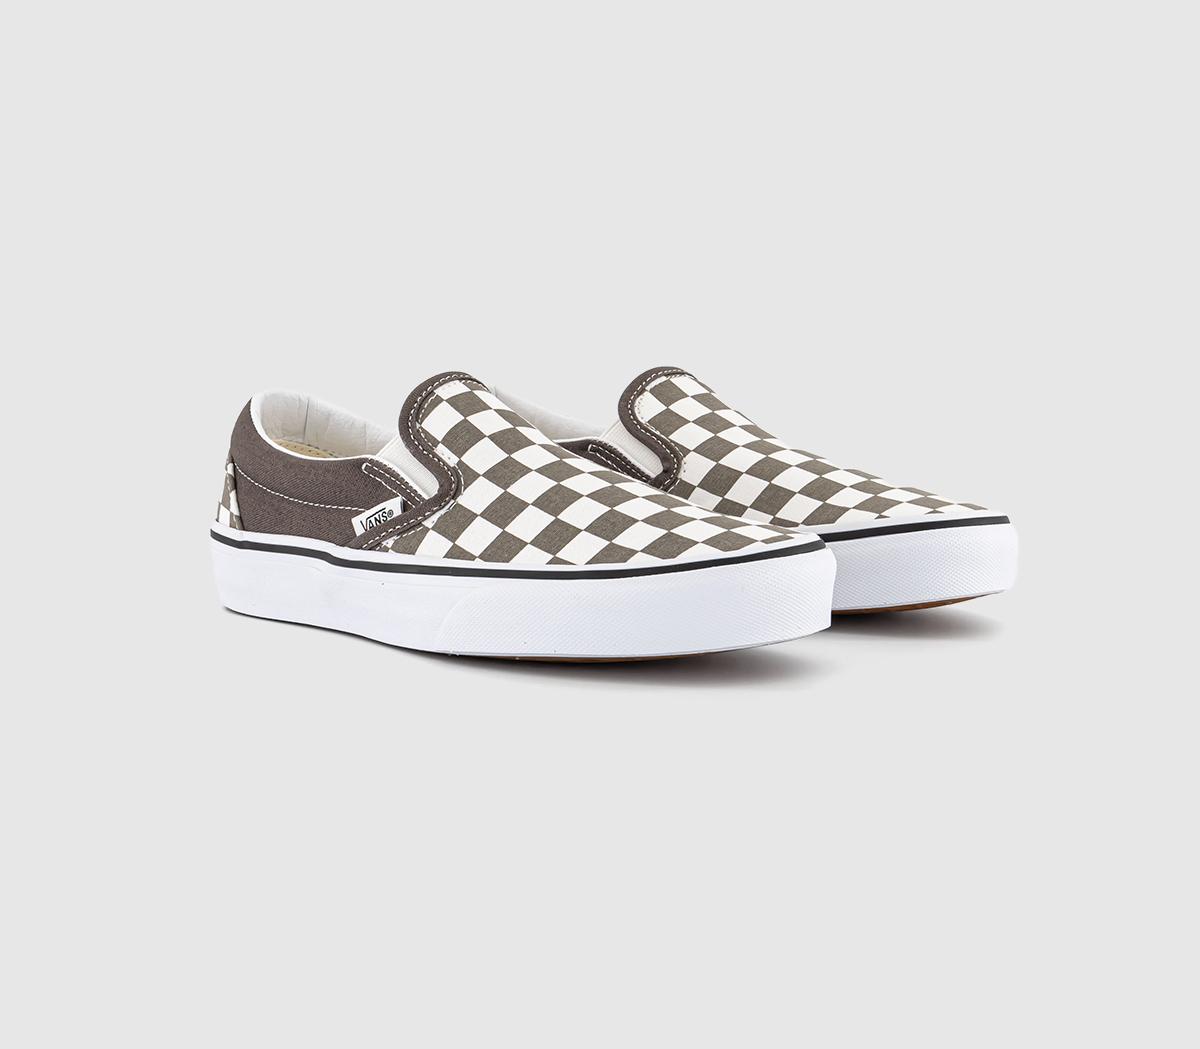 Vans Classic Slip On Trainers Color Theory Checkerboard Bungee Cord Brown/White, 6